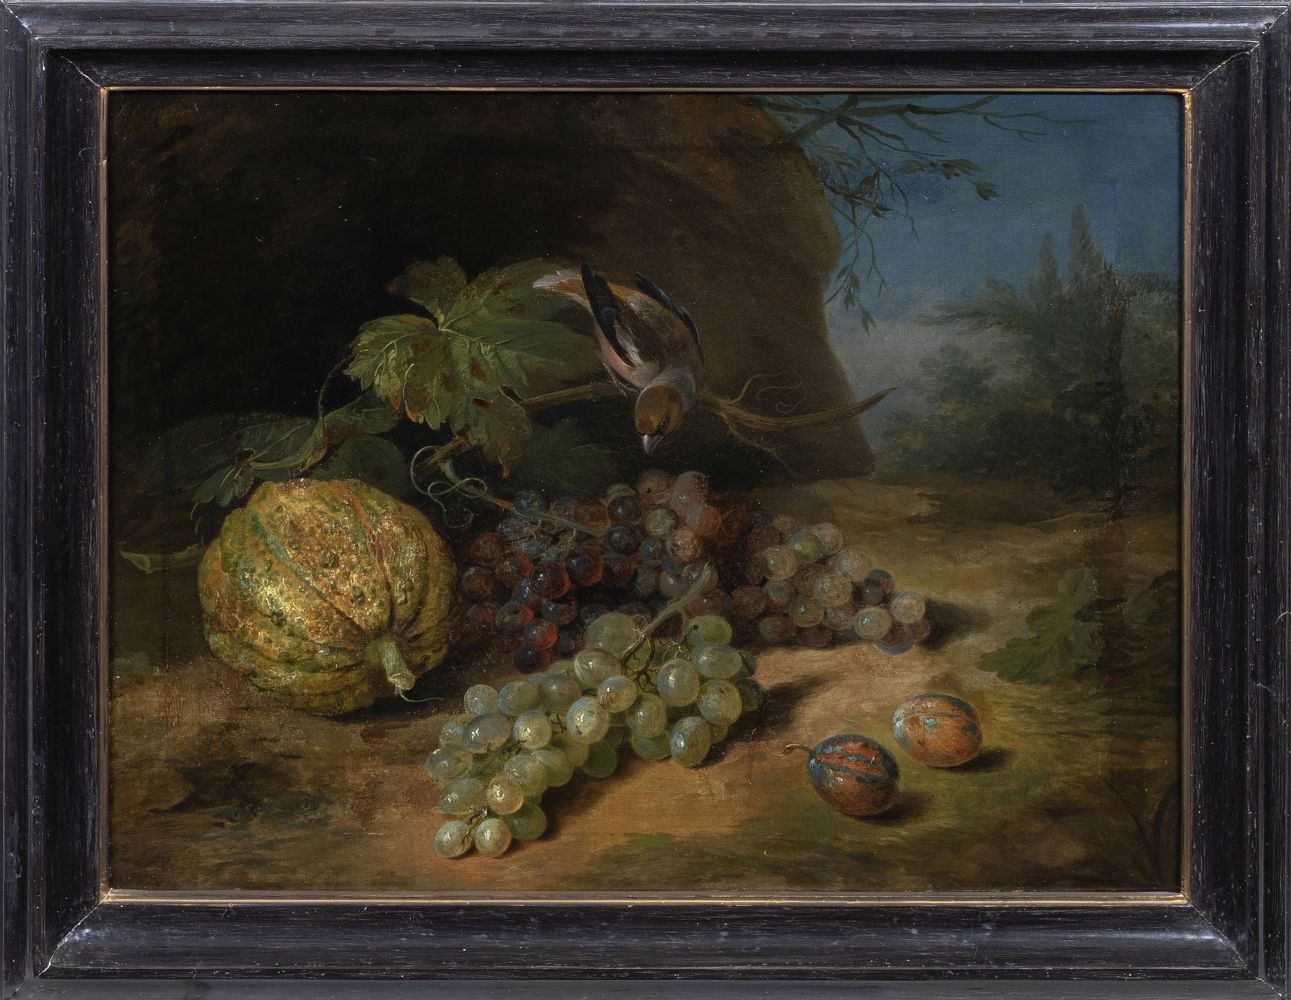 Fruit Still Life with Hawfinch - image 2